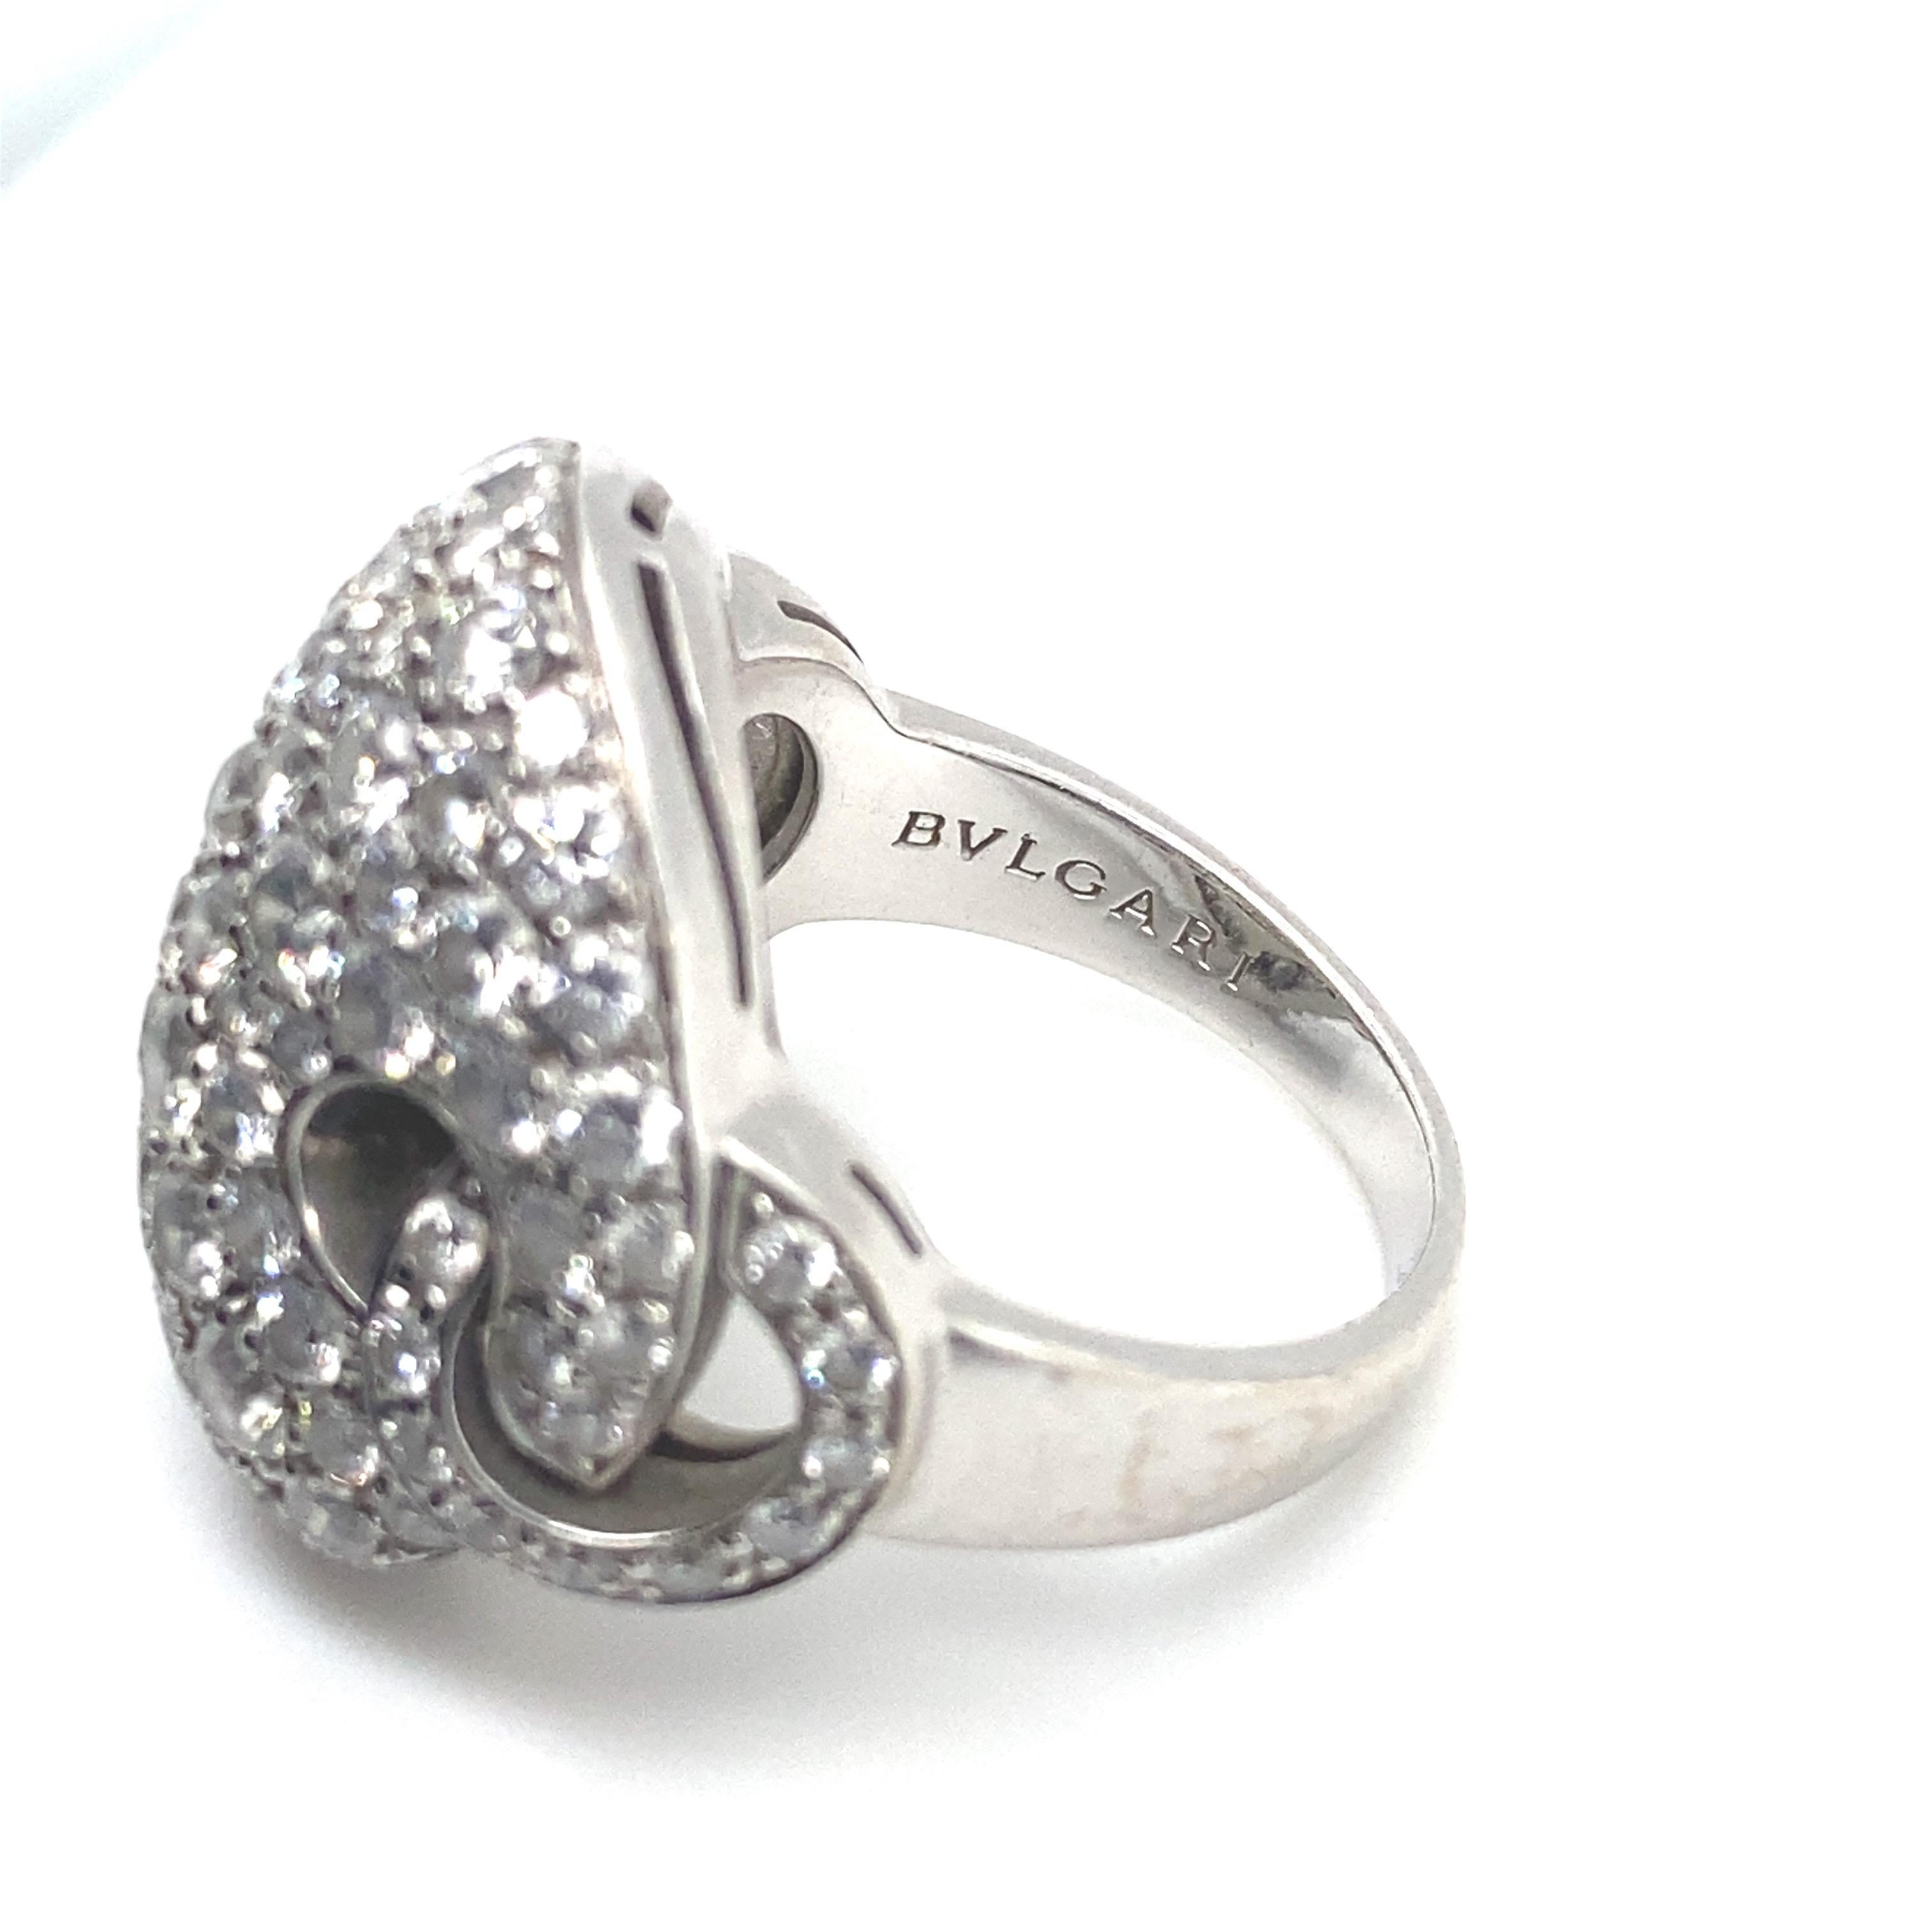 This BVLGARI cocktail ring features approximately 2 carats of diamonds set in 18K white gold. Inscribed BVLGARI.